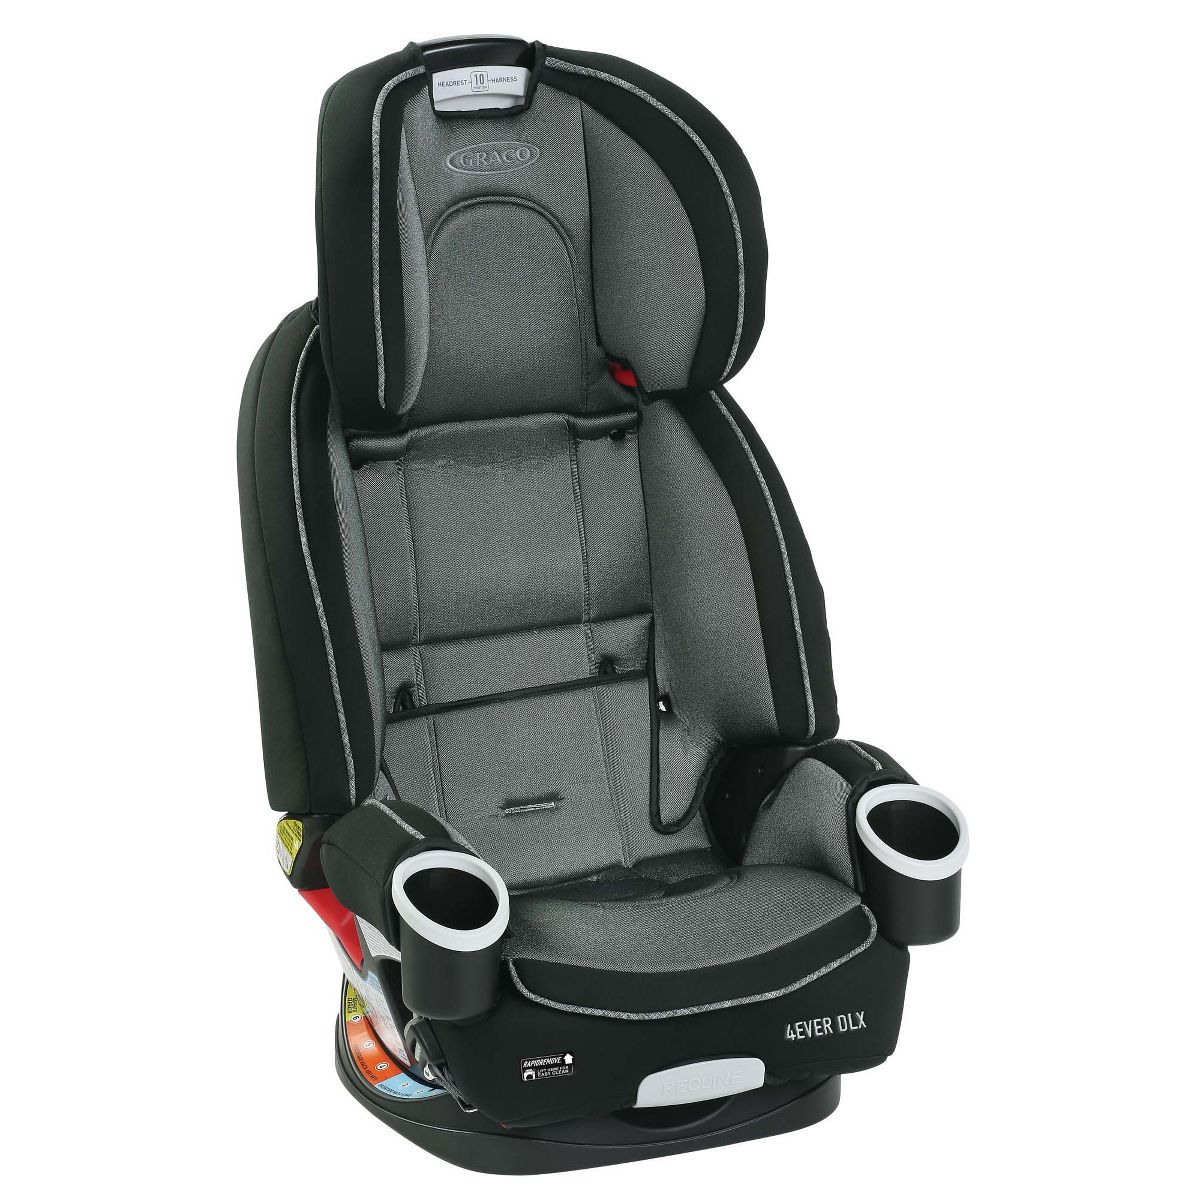 New Graco 4Ever DLX All-In-One Convertible Car Seat - Aurora